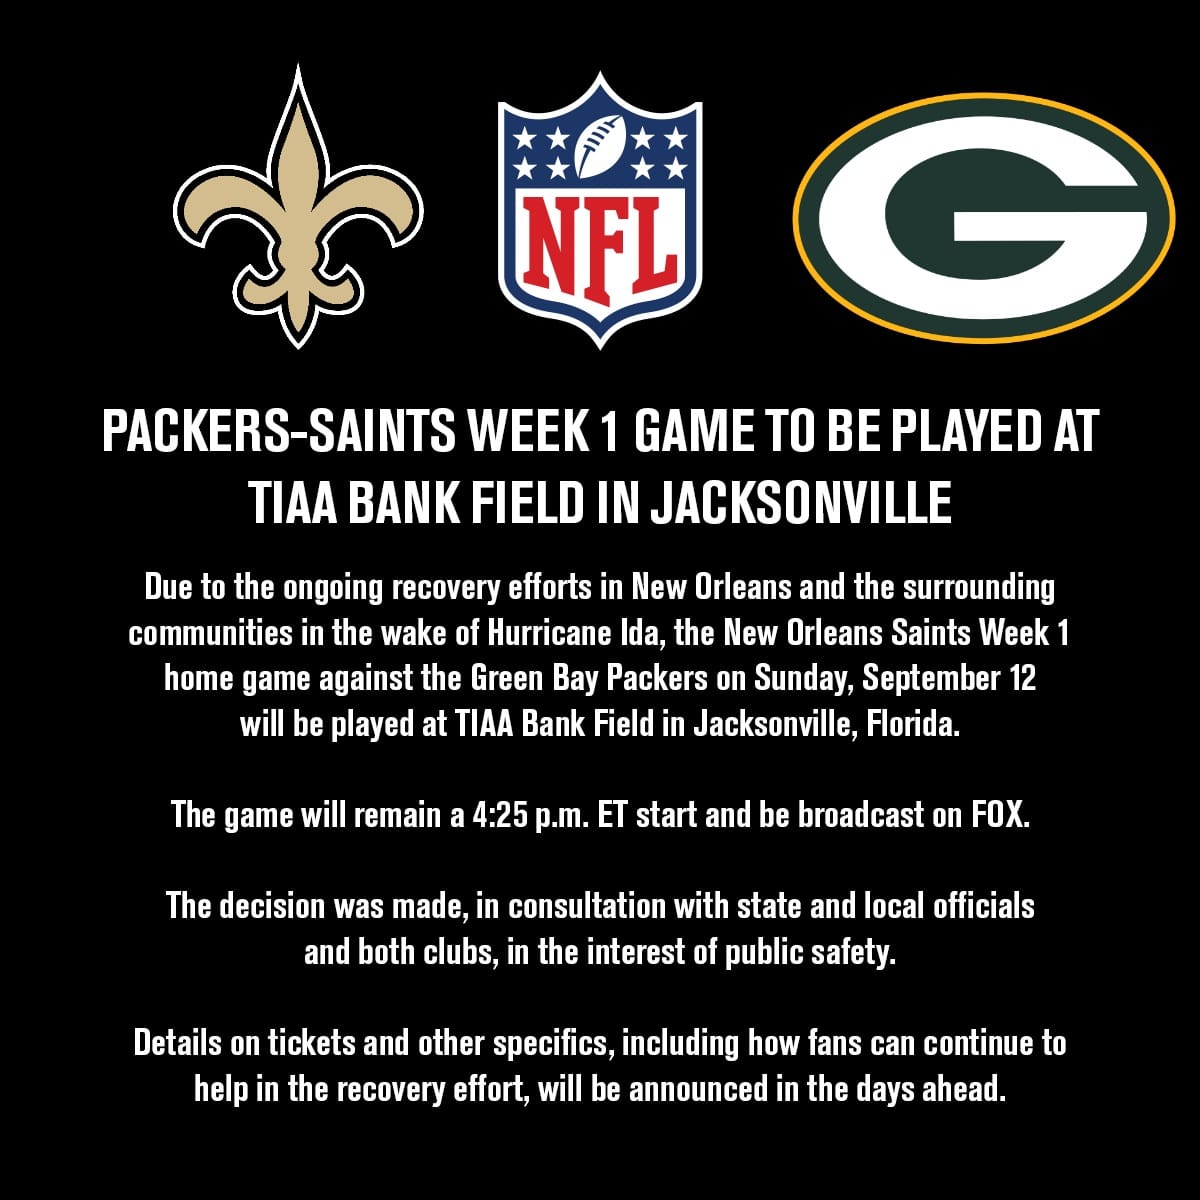 Packers-Saints week 1 Game to be played at tiaa bank field in jacksonville